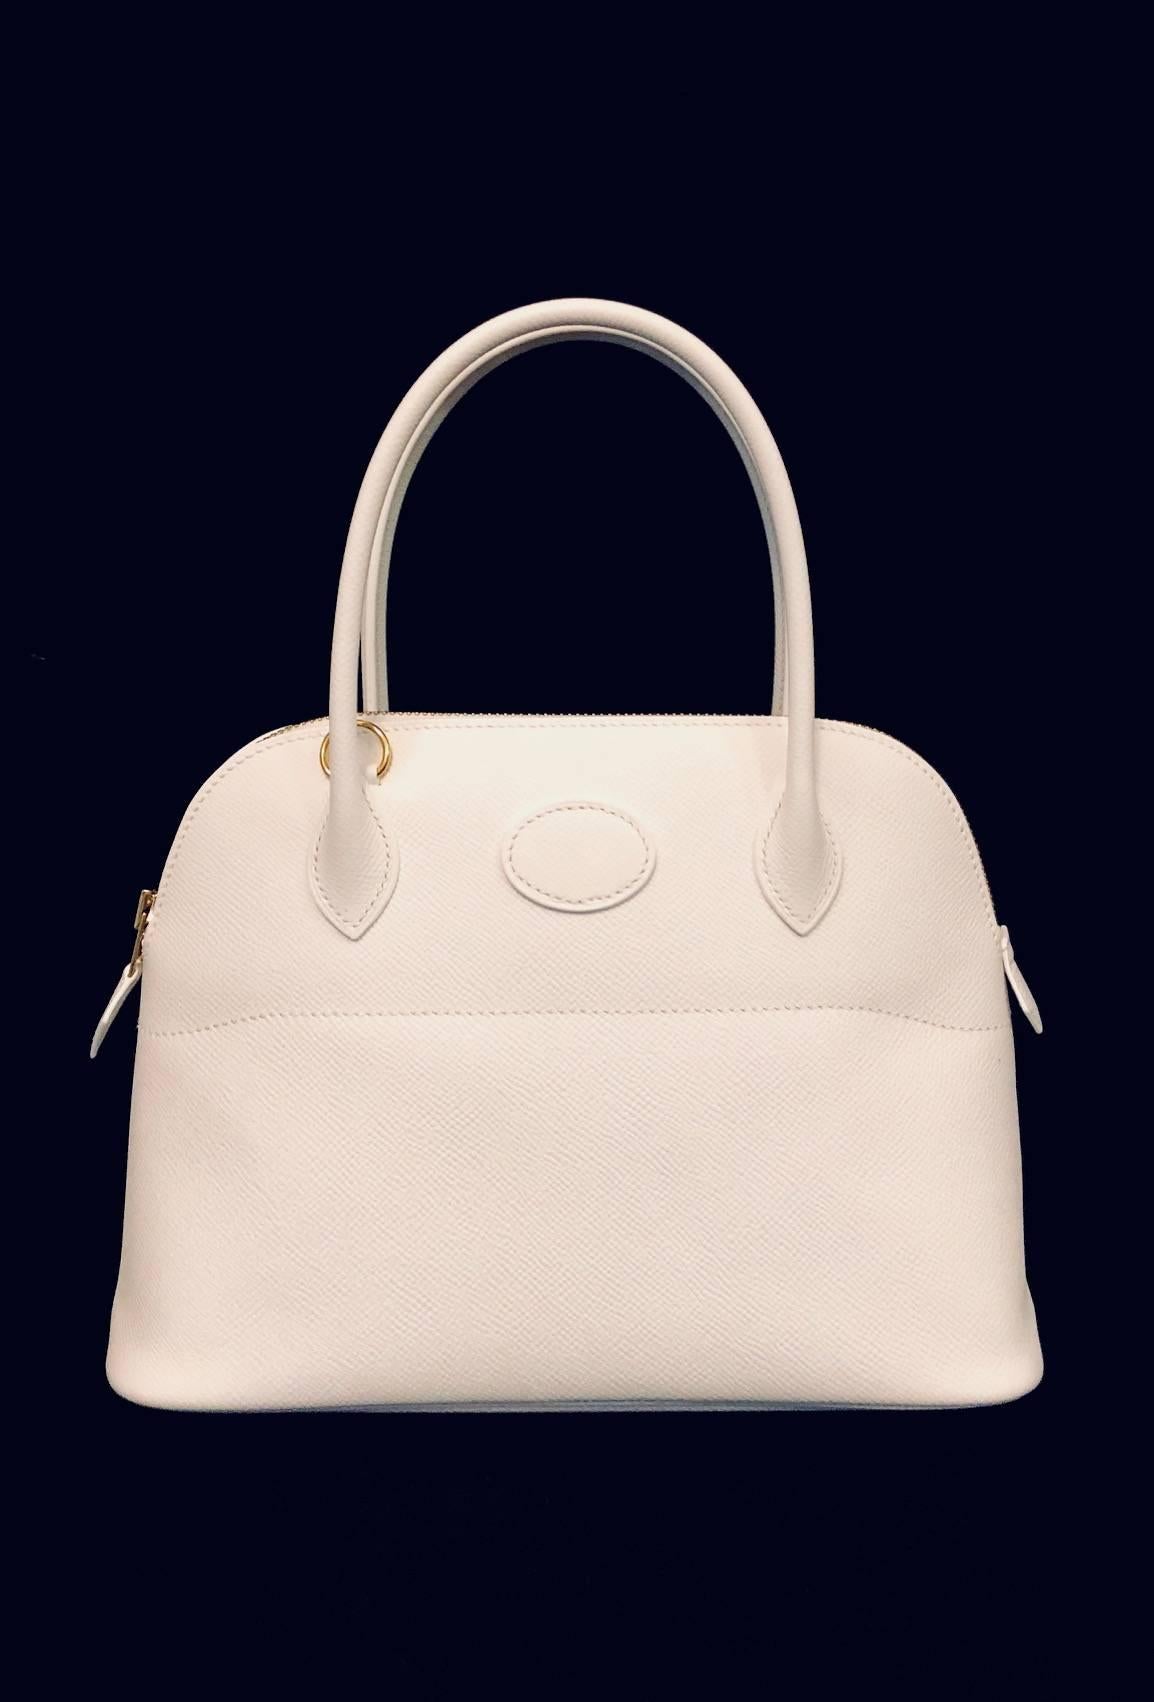 Introduced by Emile-Maurice Hermes in 1923, the Bolide has become a classic and instantly recognizable design! Features gold tone hardware, ultra-luxurious white Epsom leather all over, single zip closure, and an oval patch. Bag easily transforms to